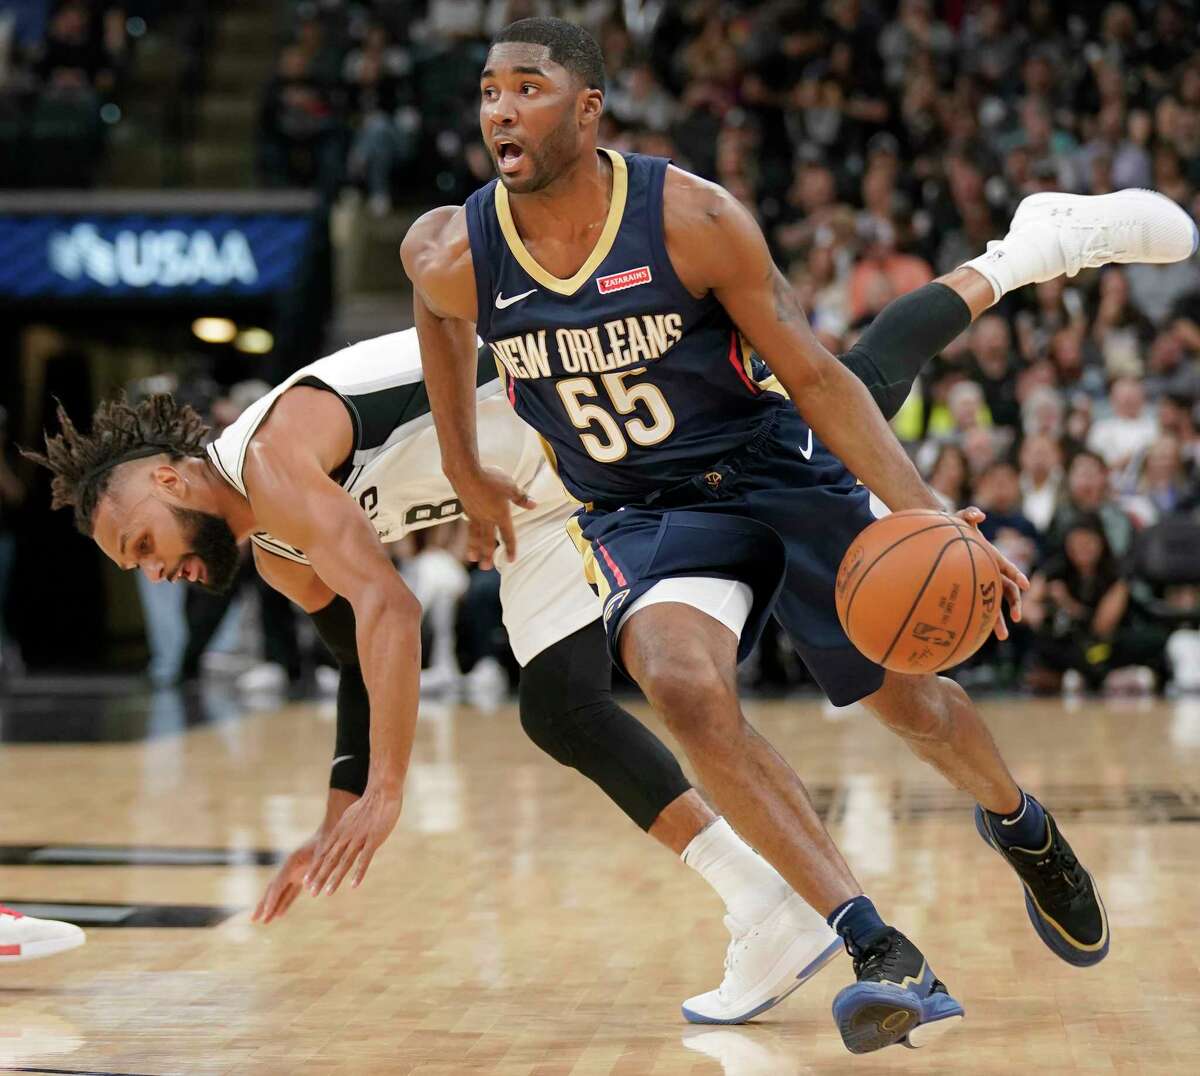 New Orleans Pelicans' E'Twaun Moore (55) drives past San Antonio Spurs' Patty Mills during the first half of an NBA basketball game, Thursday, March 15, 2018, in San Antonio. (AP Photo/Darren Abate)